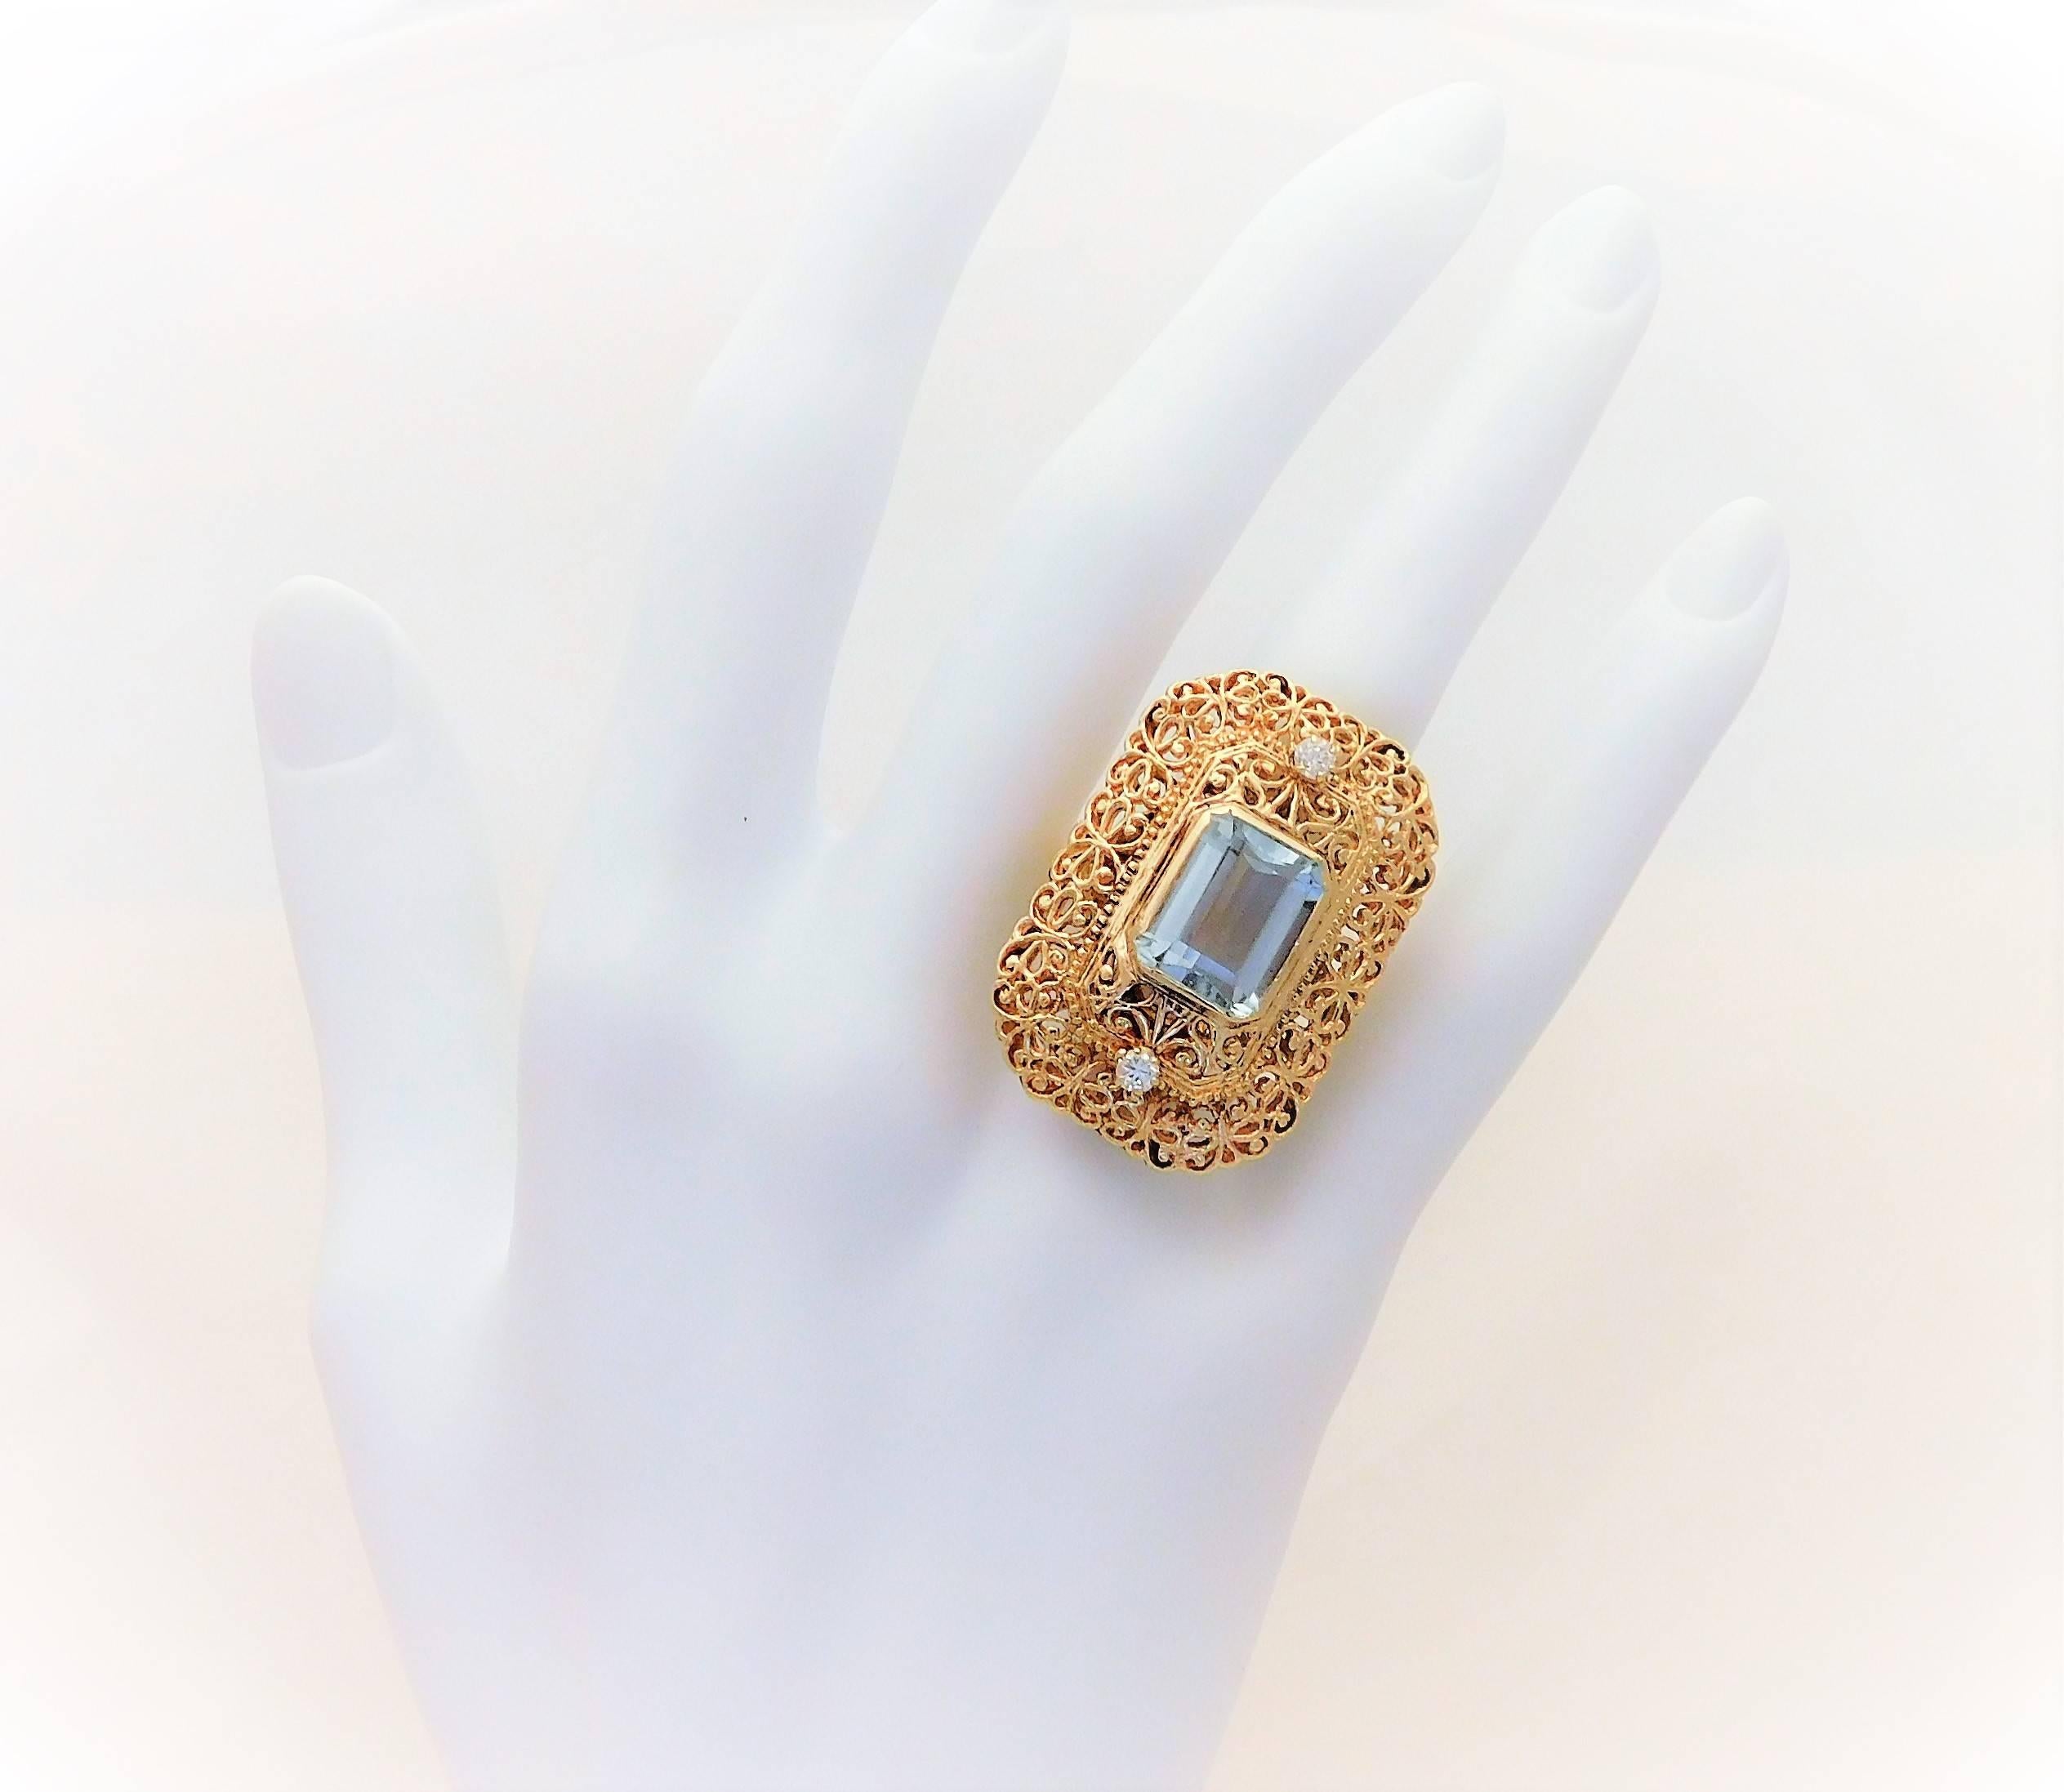 
From a Southern aristocratic estate.  Circa Mid 20th Century.  This breathtaking big statement-style ring has been meticulously crafted in solid 14k yellow gold.  It is masterfully jeweled with two G/H color natural round brilliant-cut diamonds